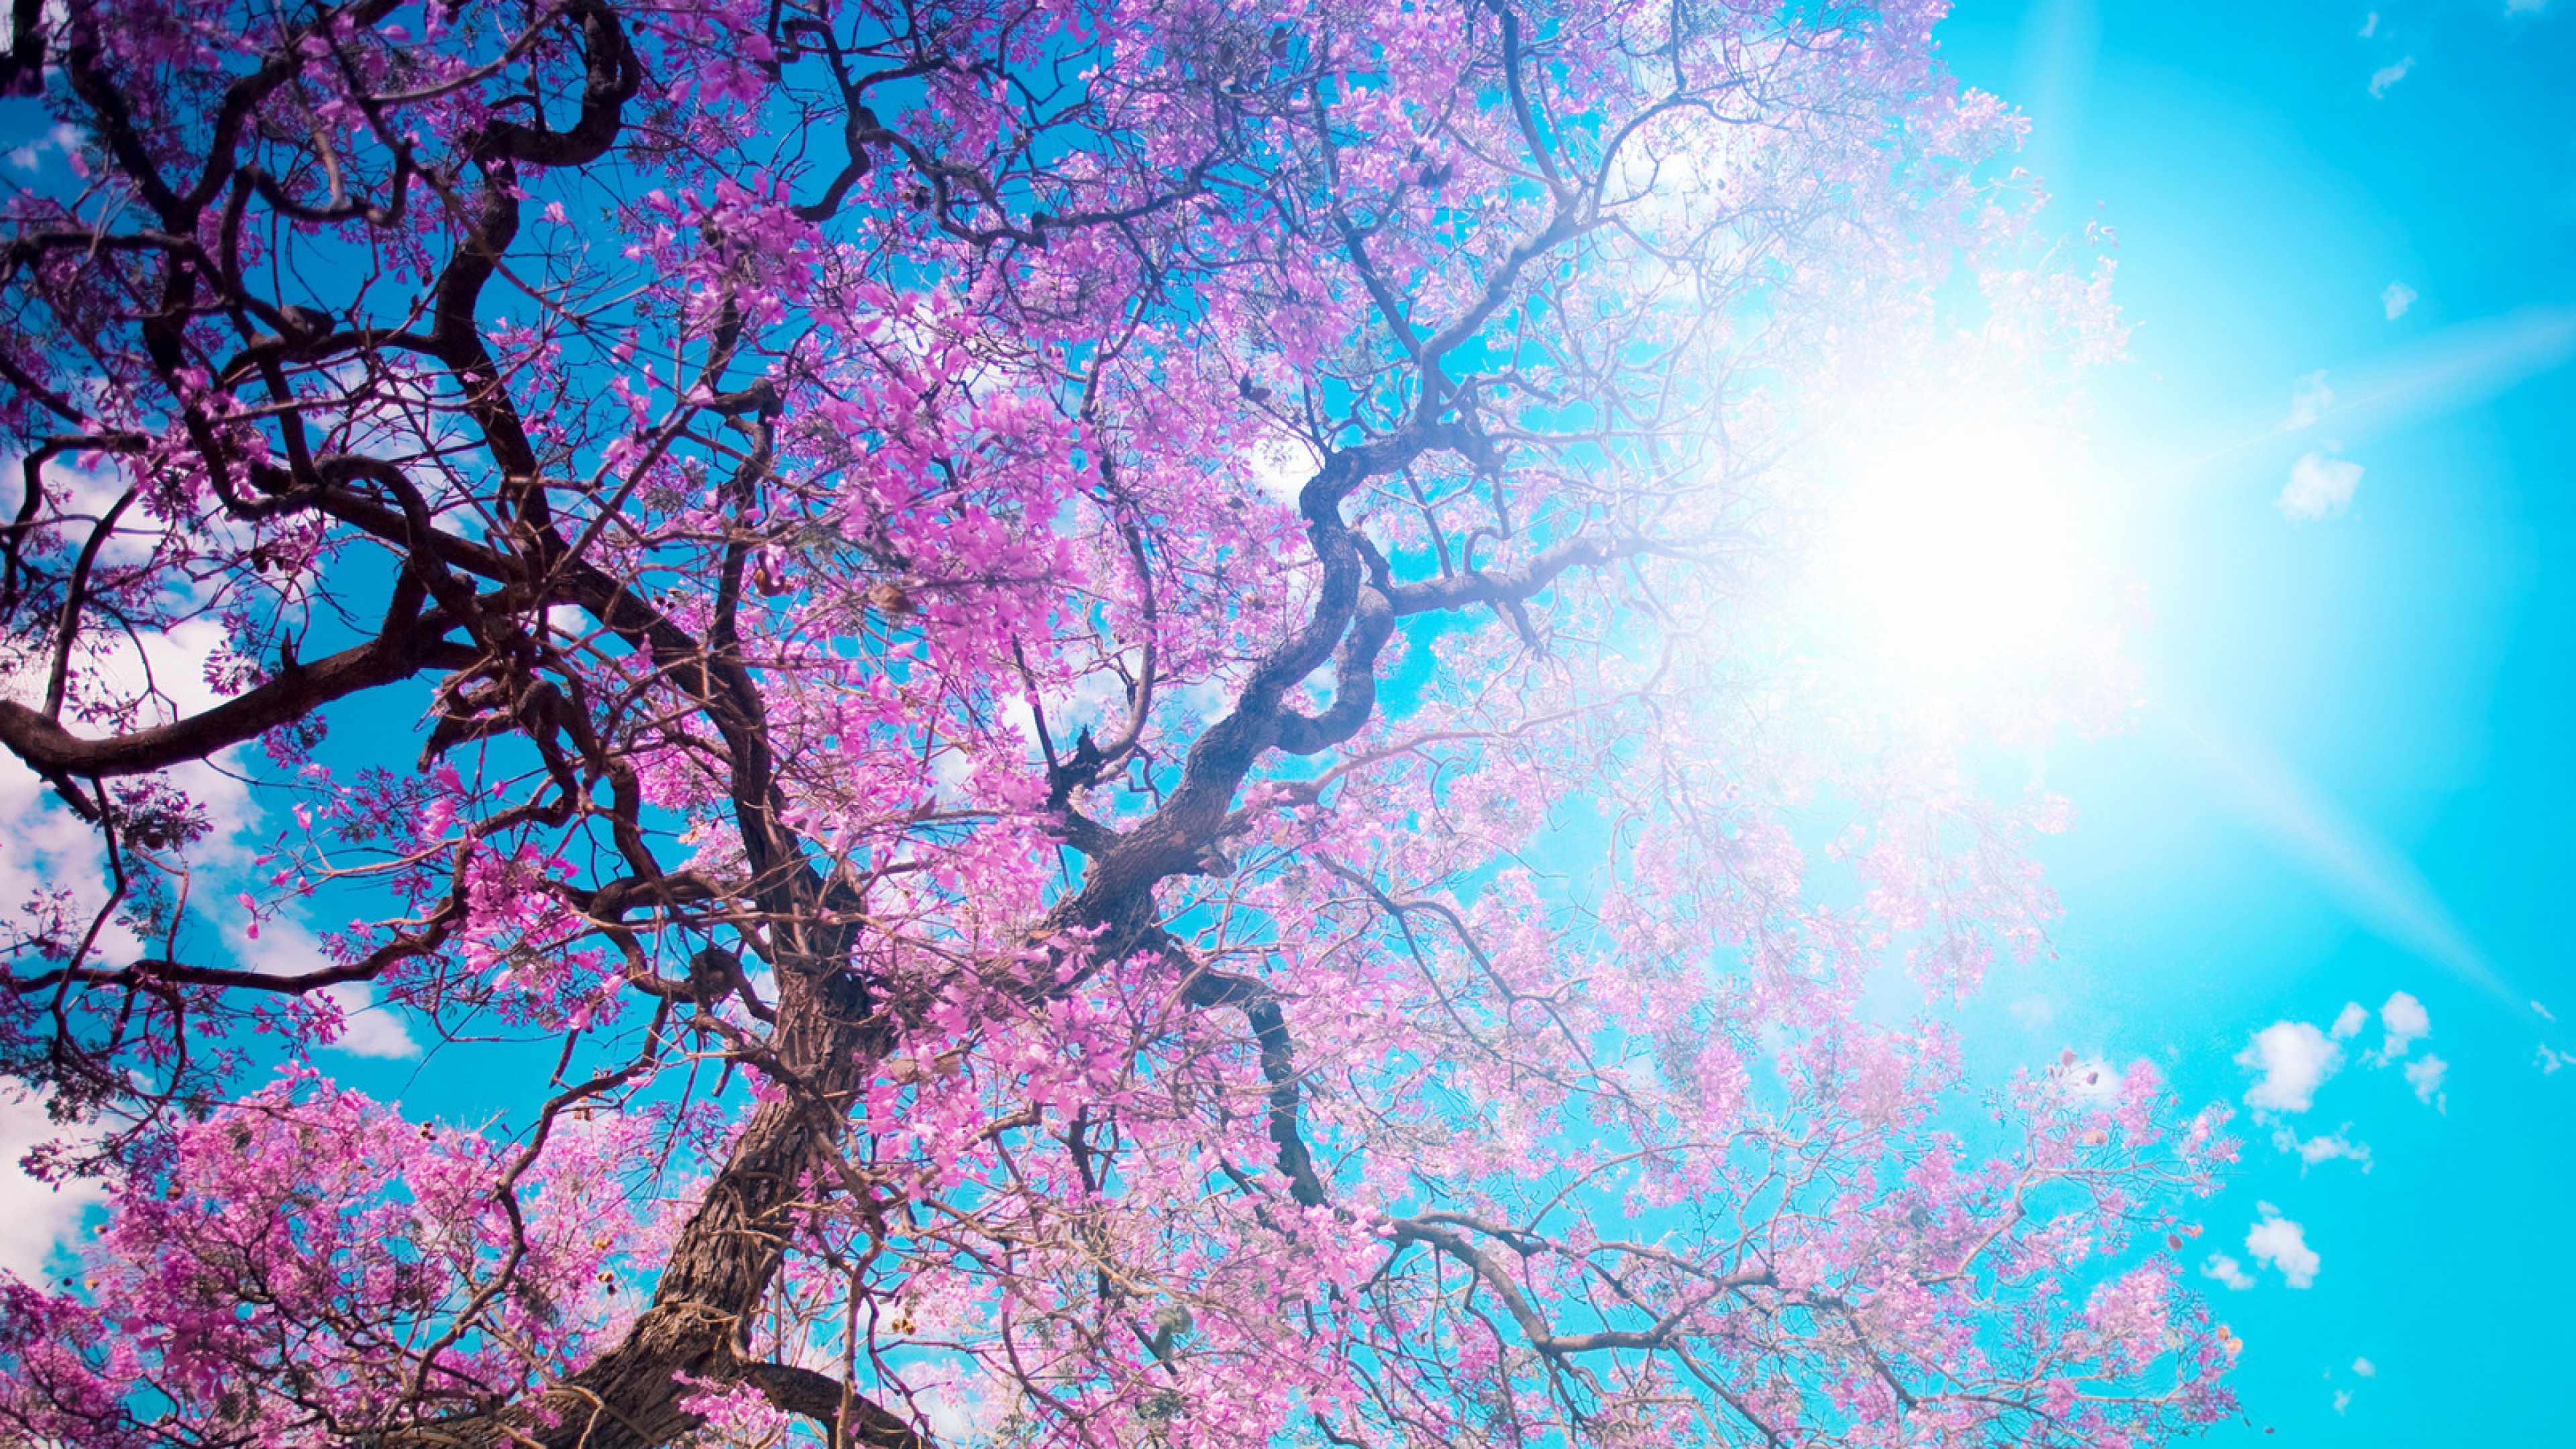  to enjoy the cherry blossoms Japan Wallpaper Background 4K Ultra HD